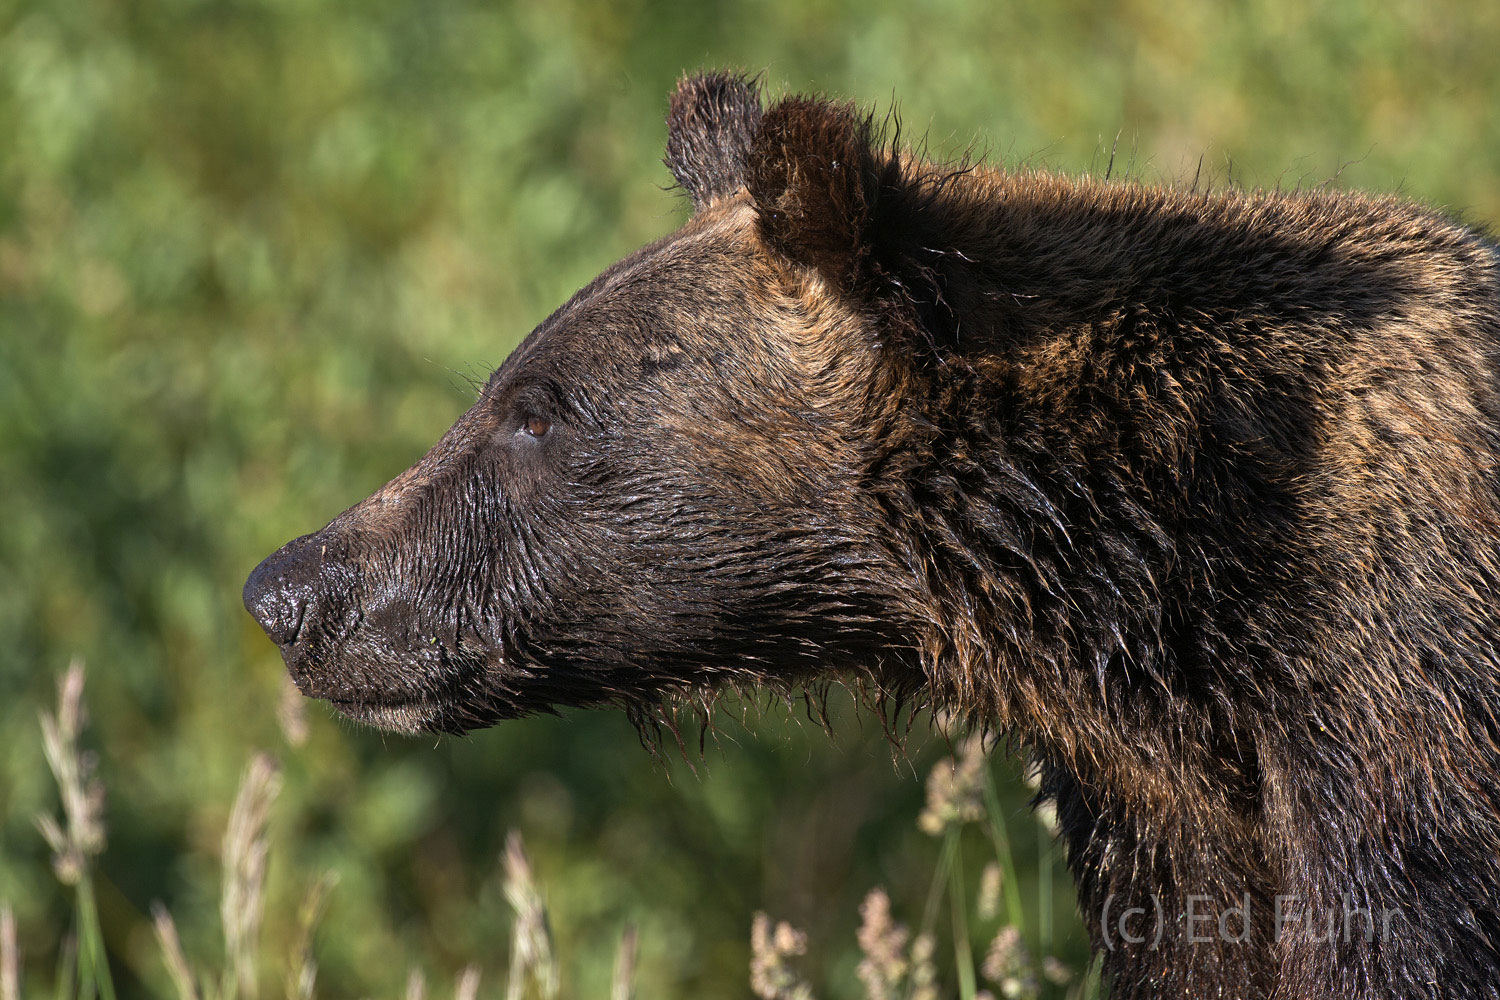 Wet from a morning grazing and digging, one of gtizzlyy 610's cub's peers across the meadow.